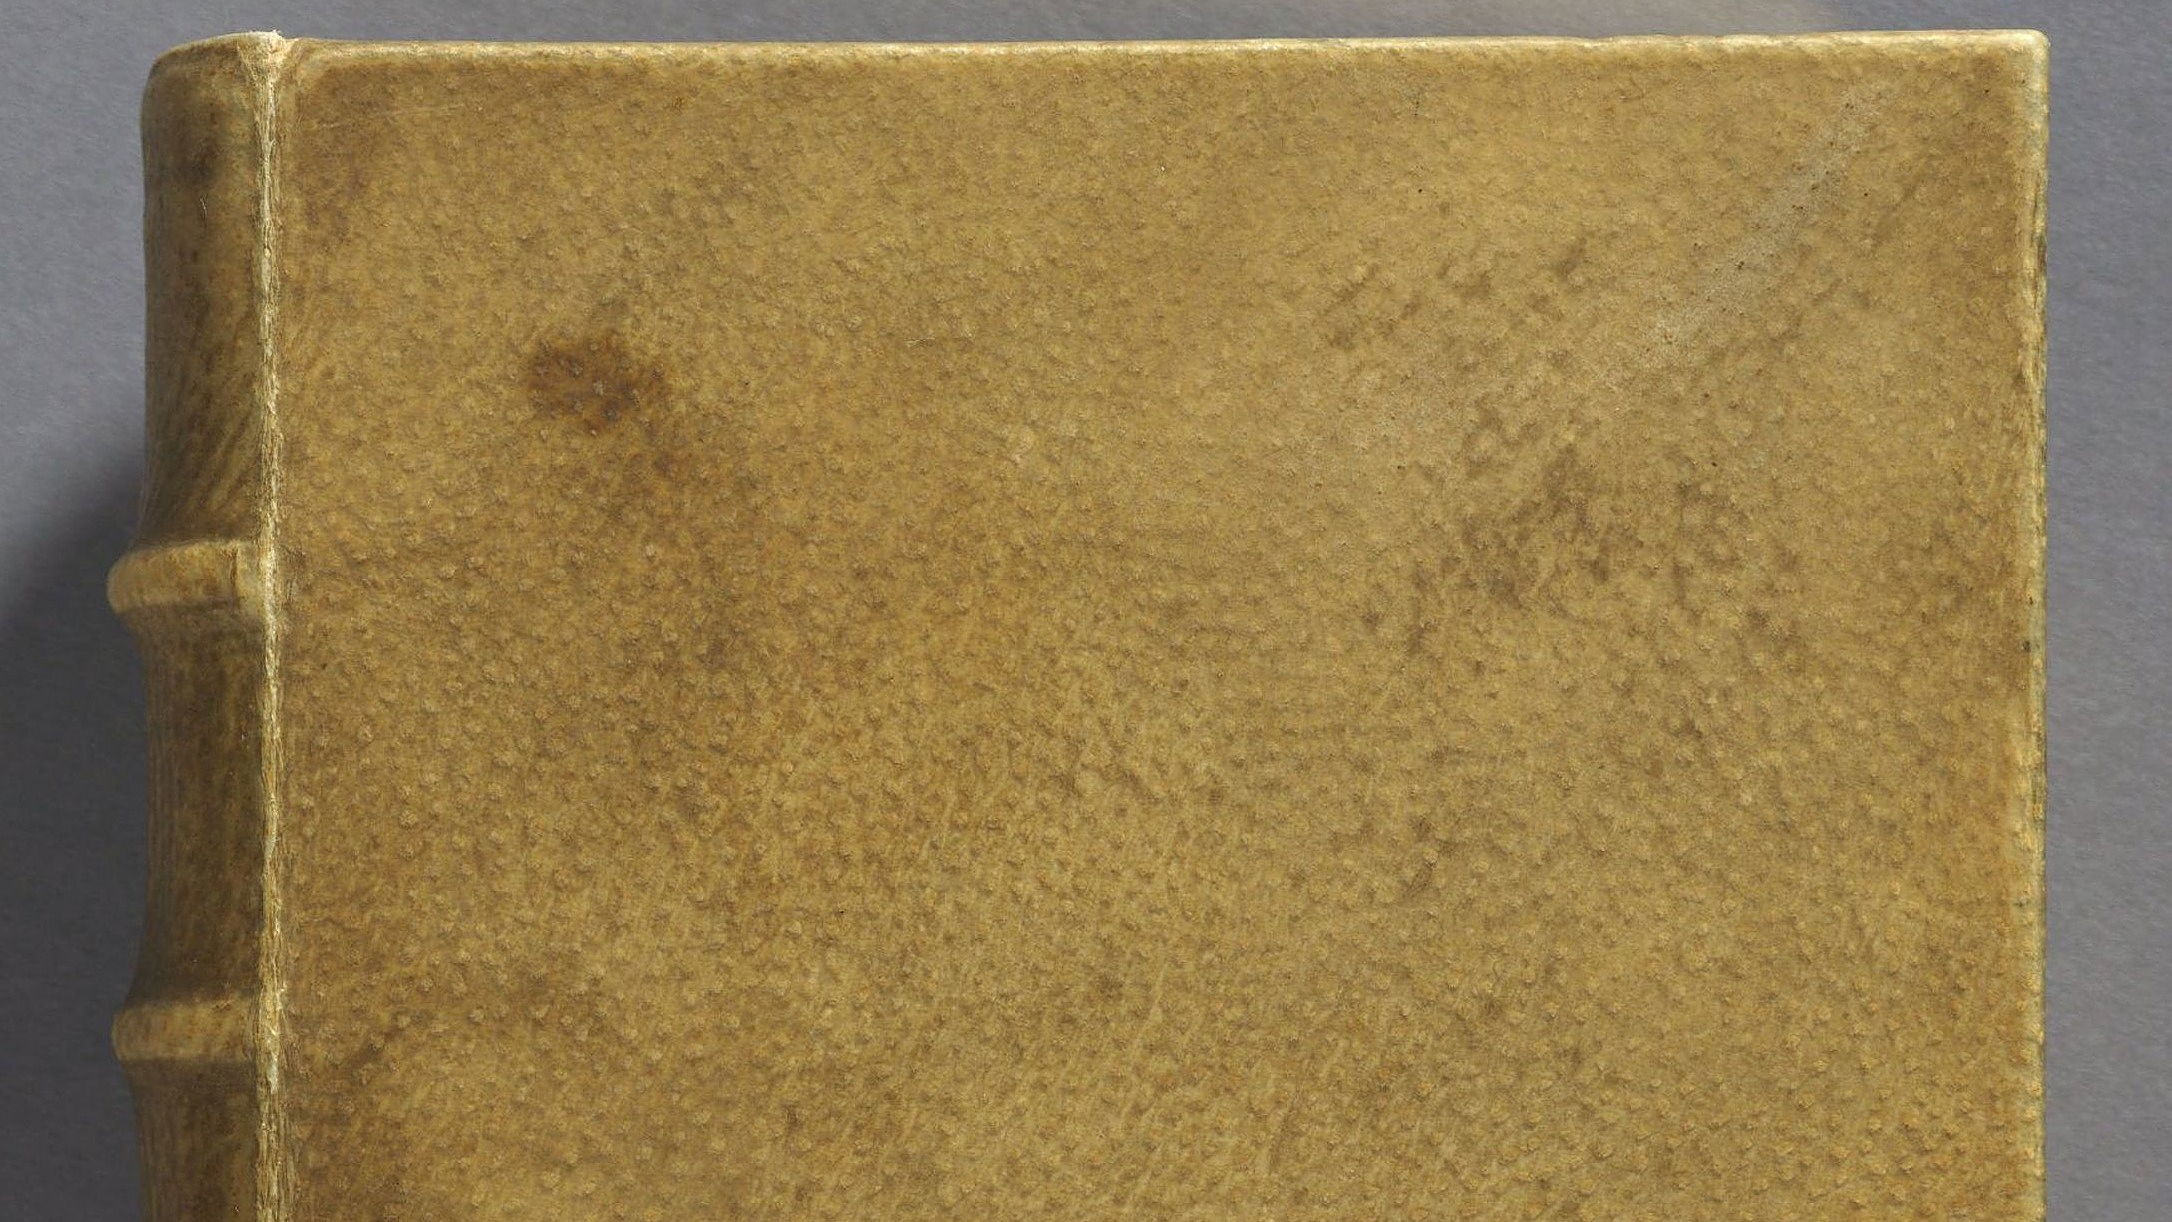 Harvard regrets the possession of a French book bound in human skin